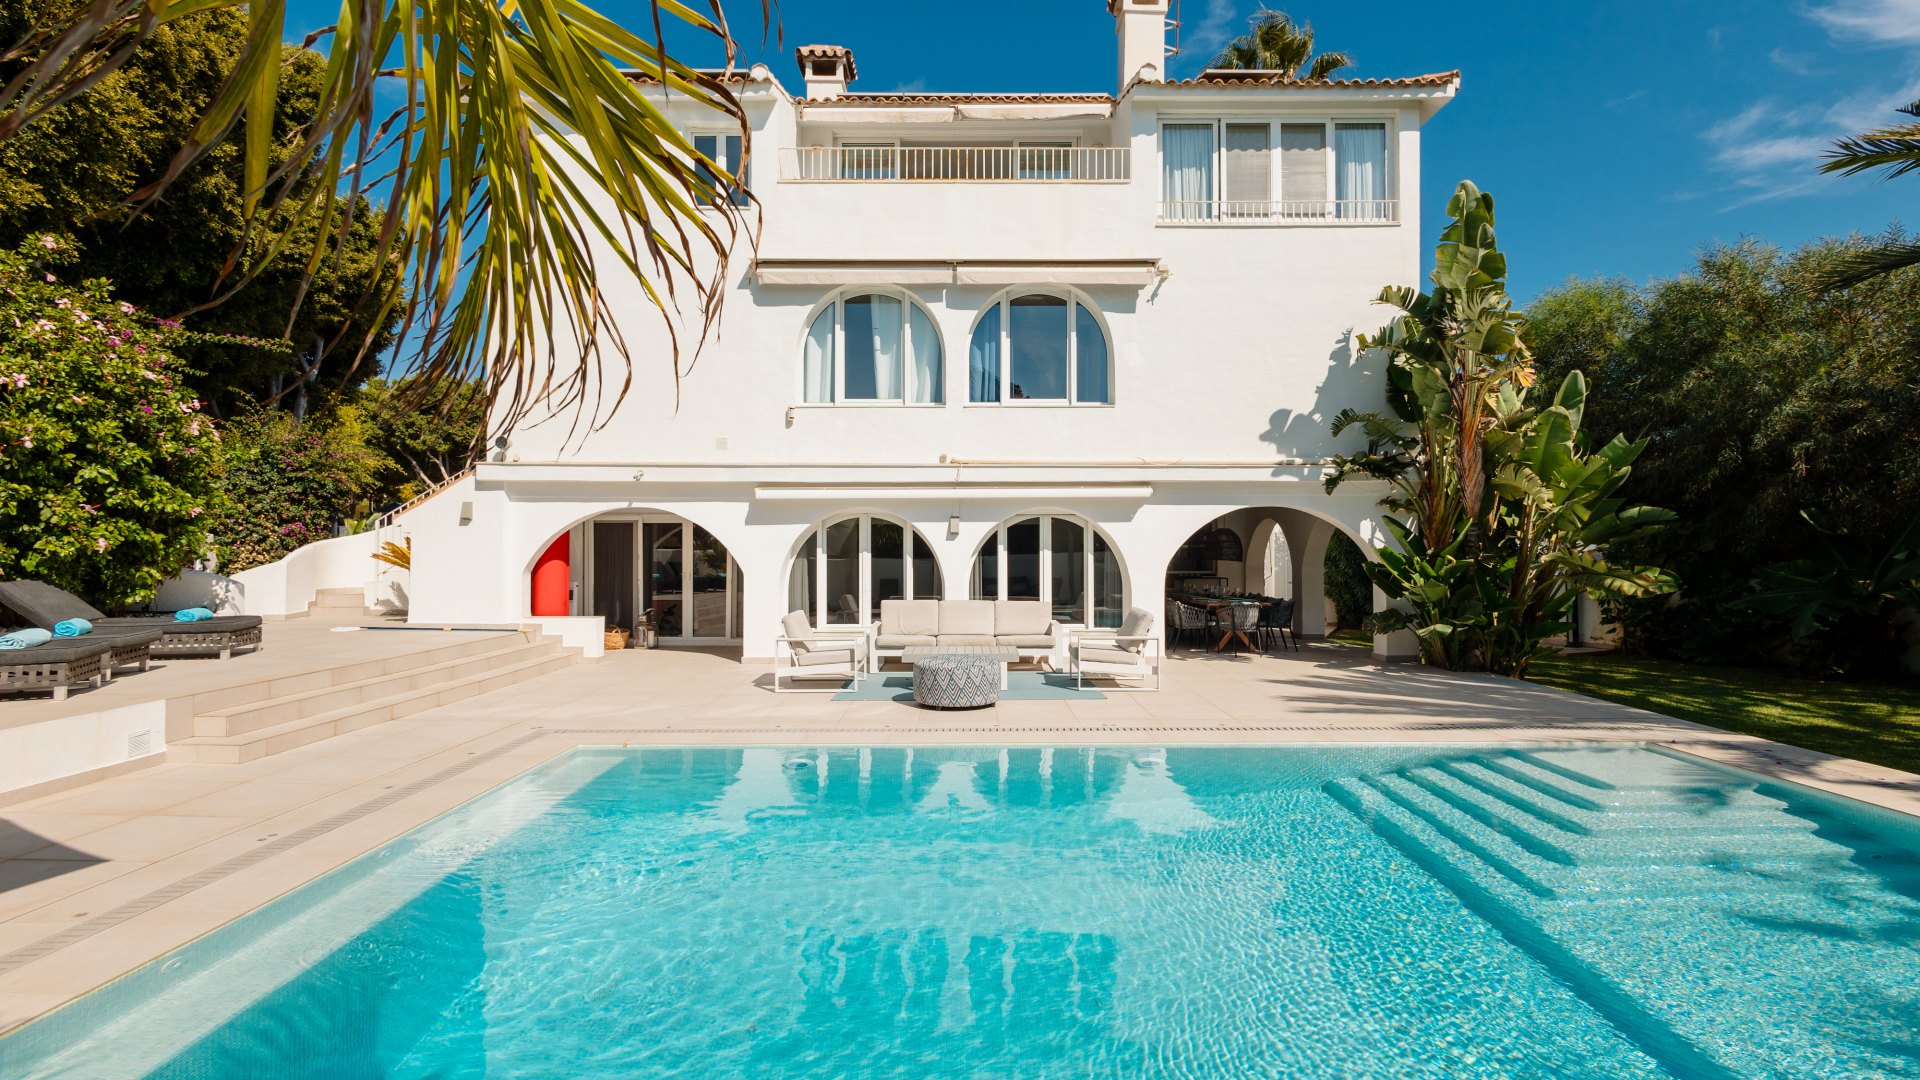 6 bedroom villa, with heated pool and sea views, next to the beach of Costabella